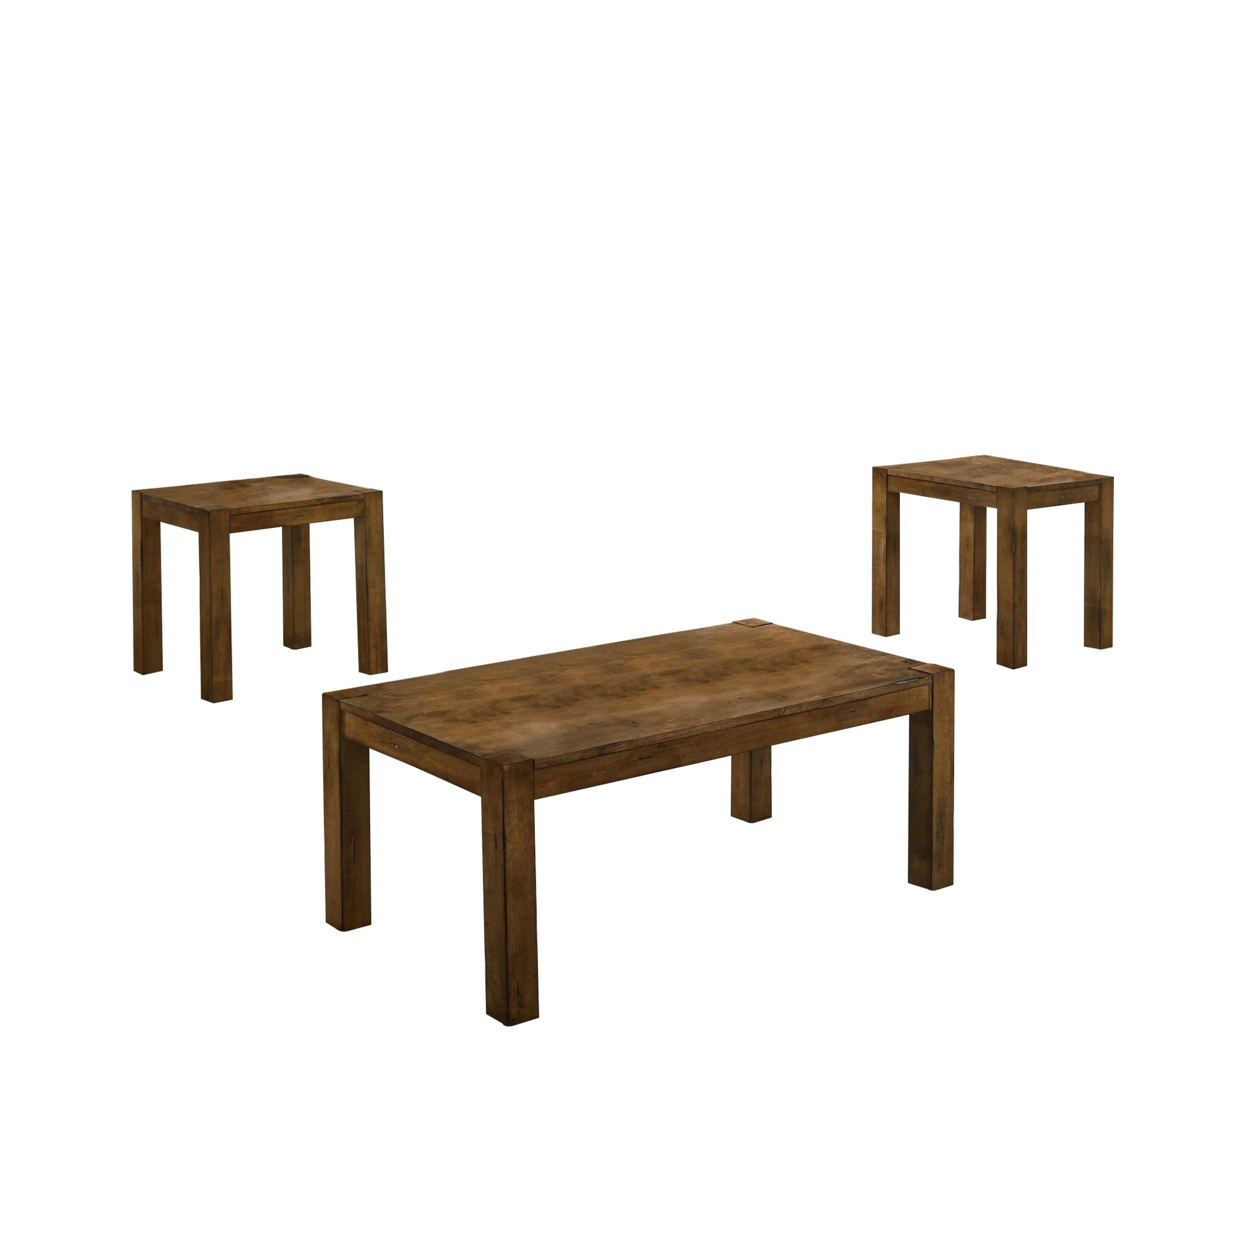 3 Piece Wooden Coffee Table And End Table With Block Legs, Brown- Saltoro Sherpi